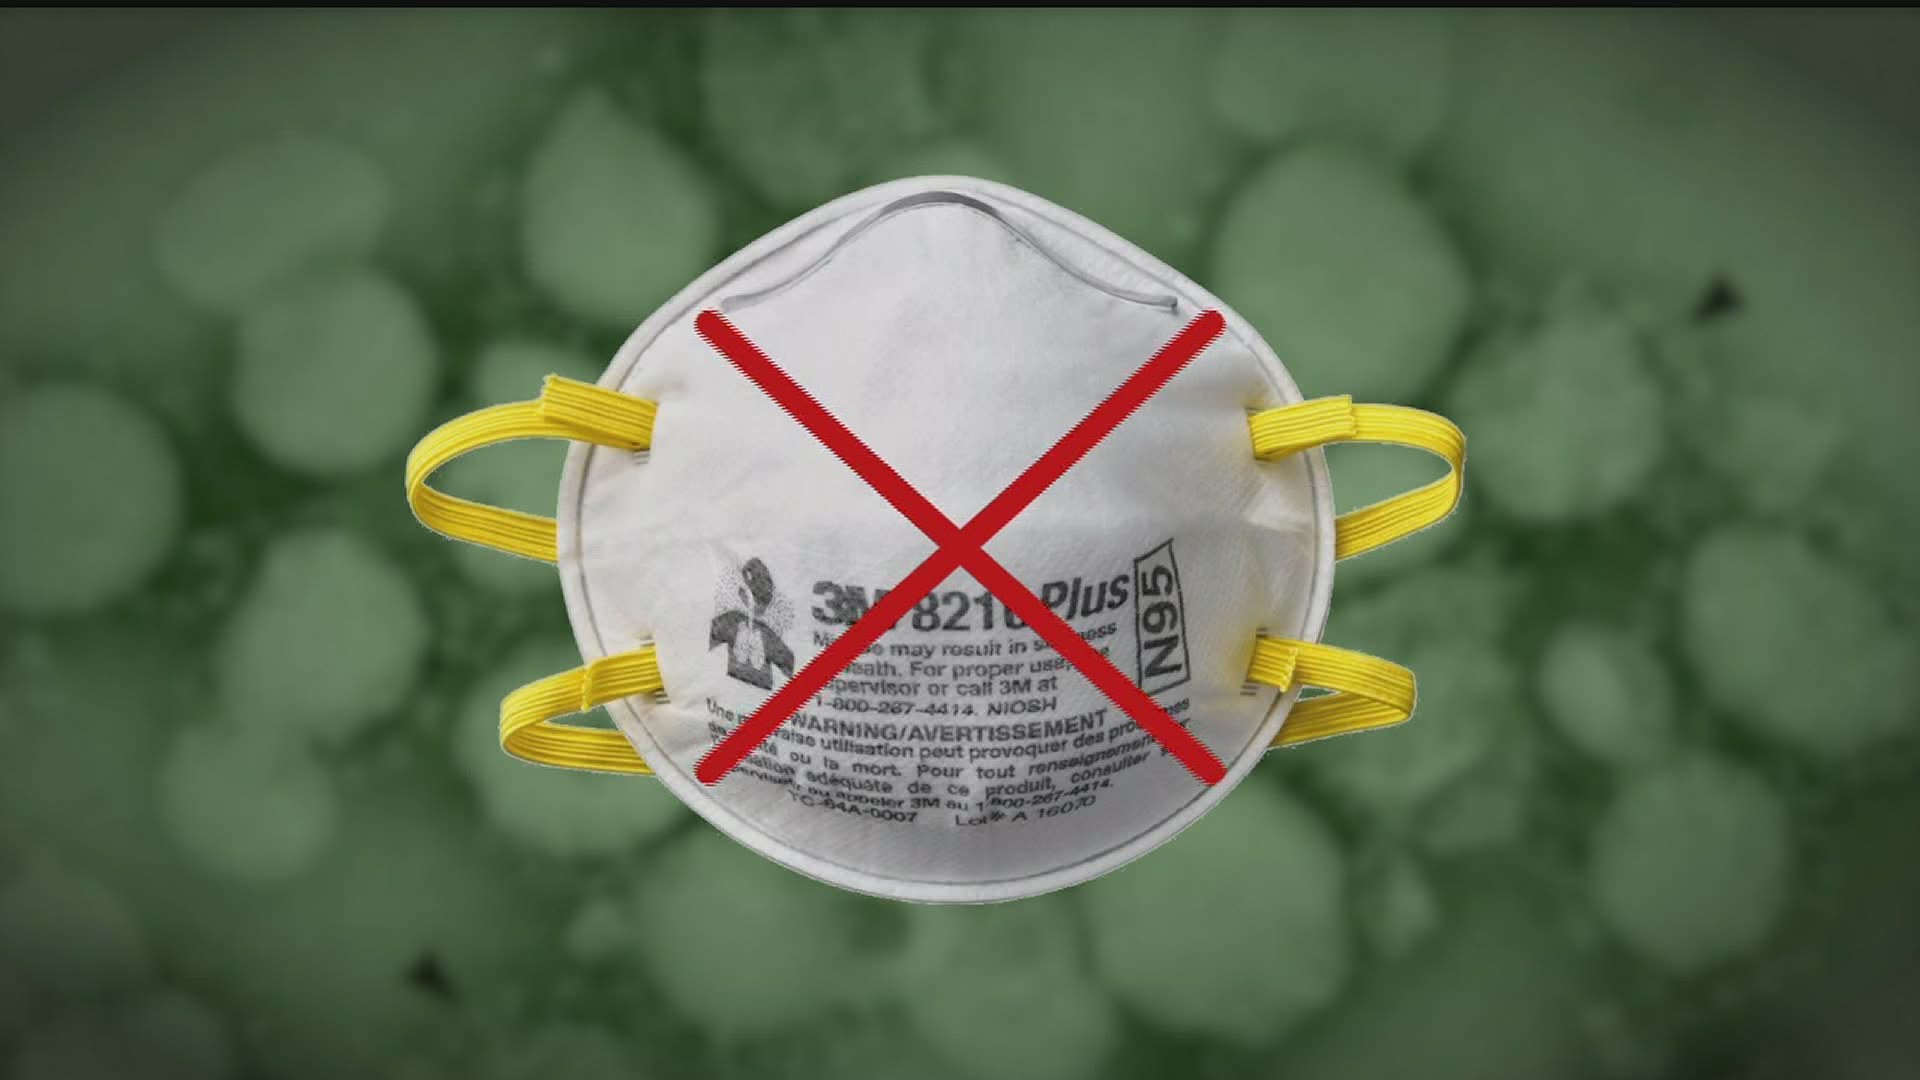 Face masks don't protect the public from coronavirus, health officials say.